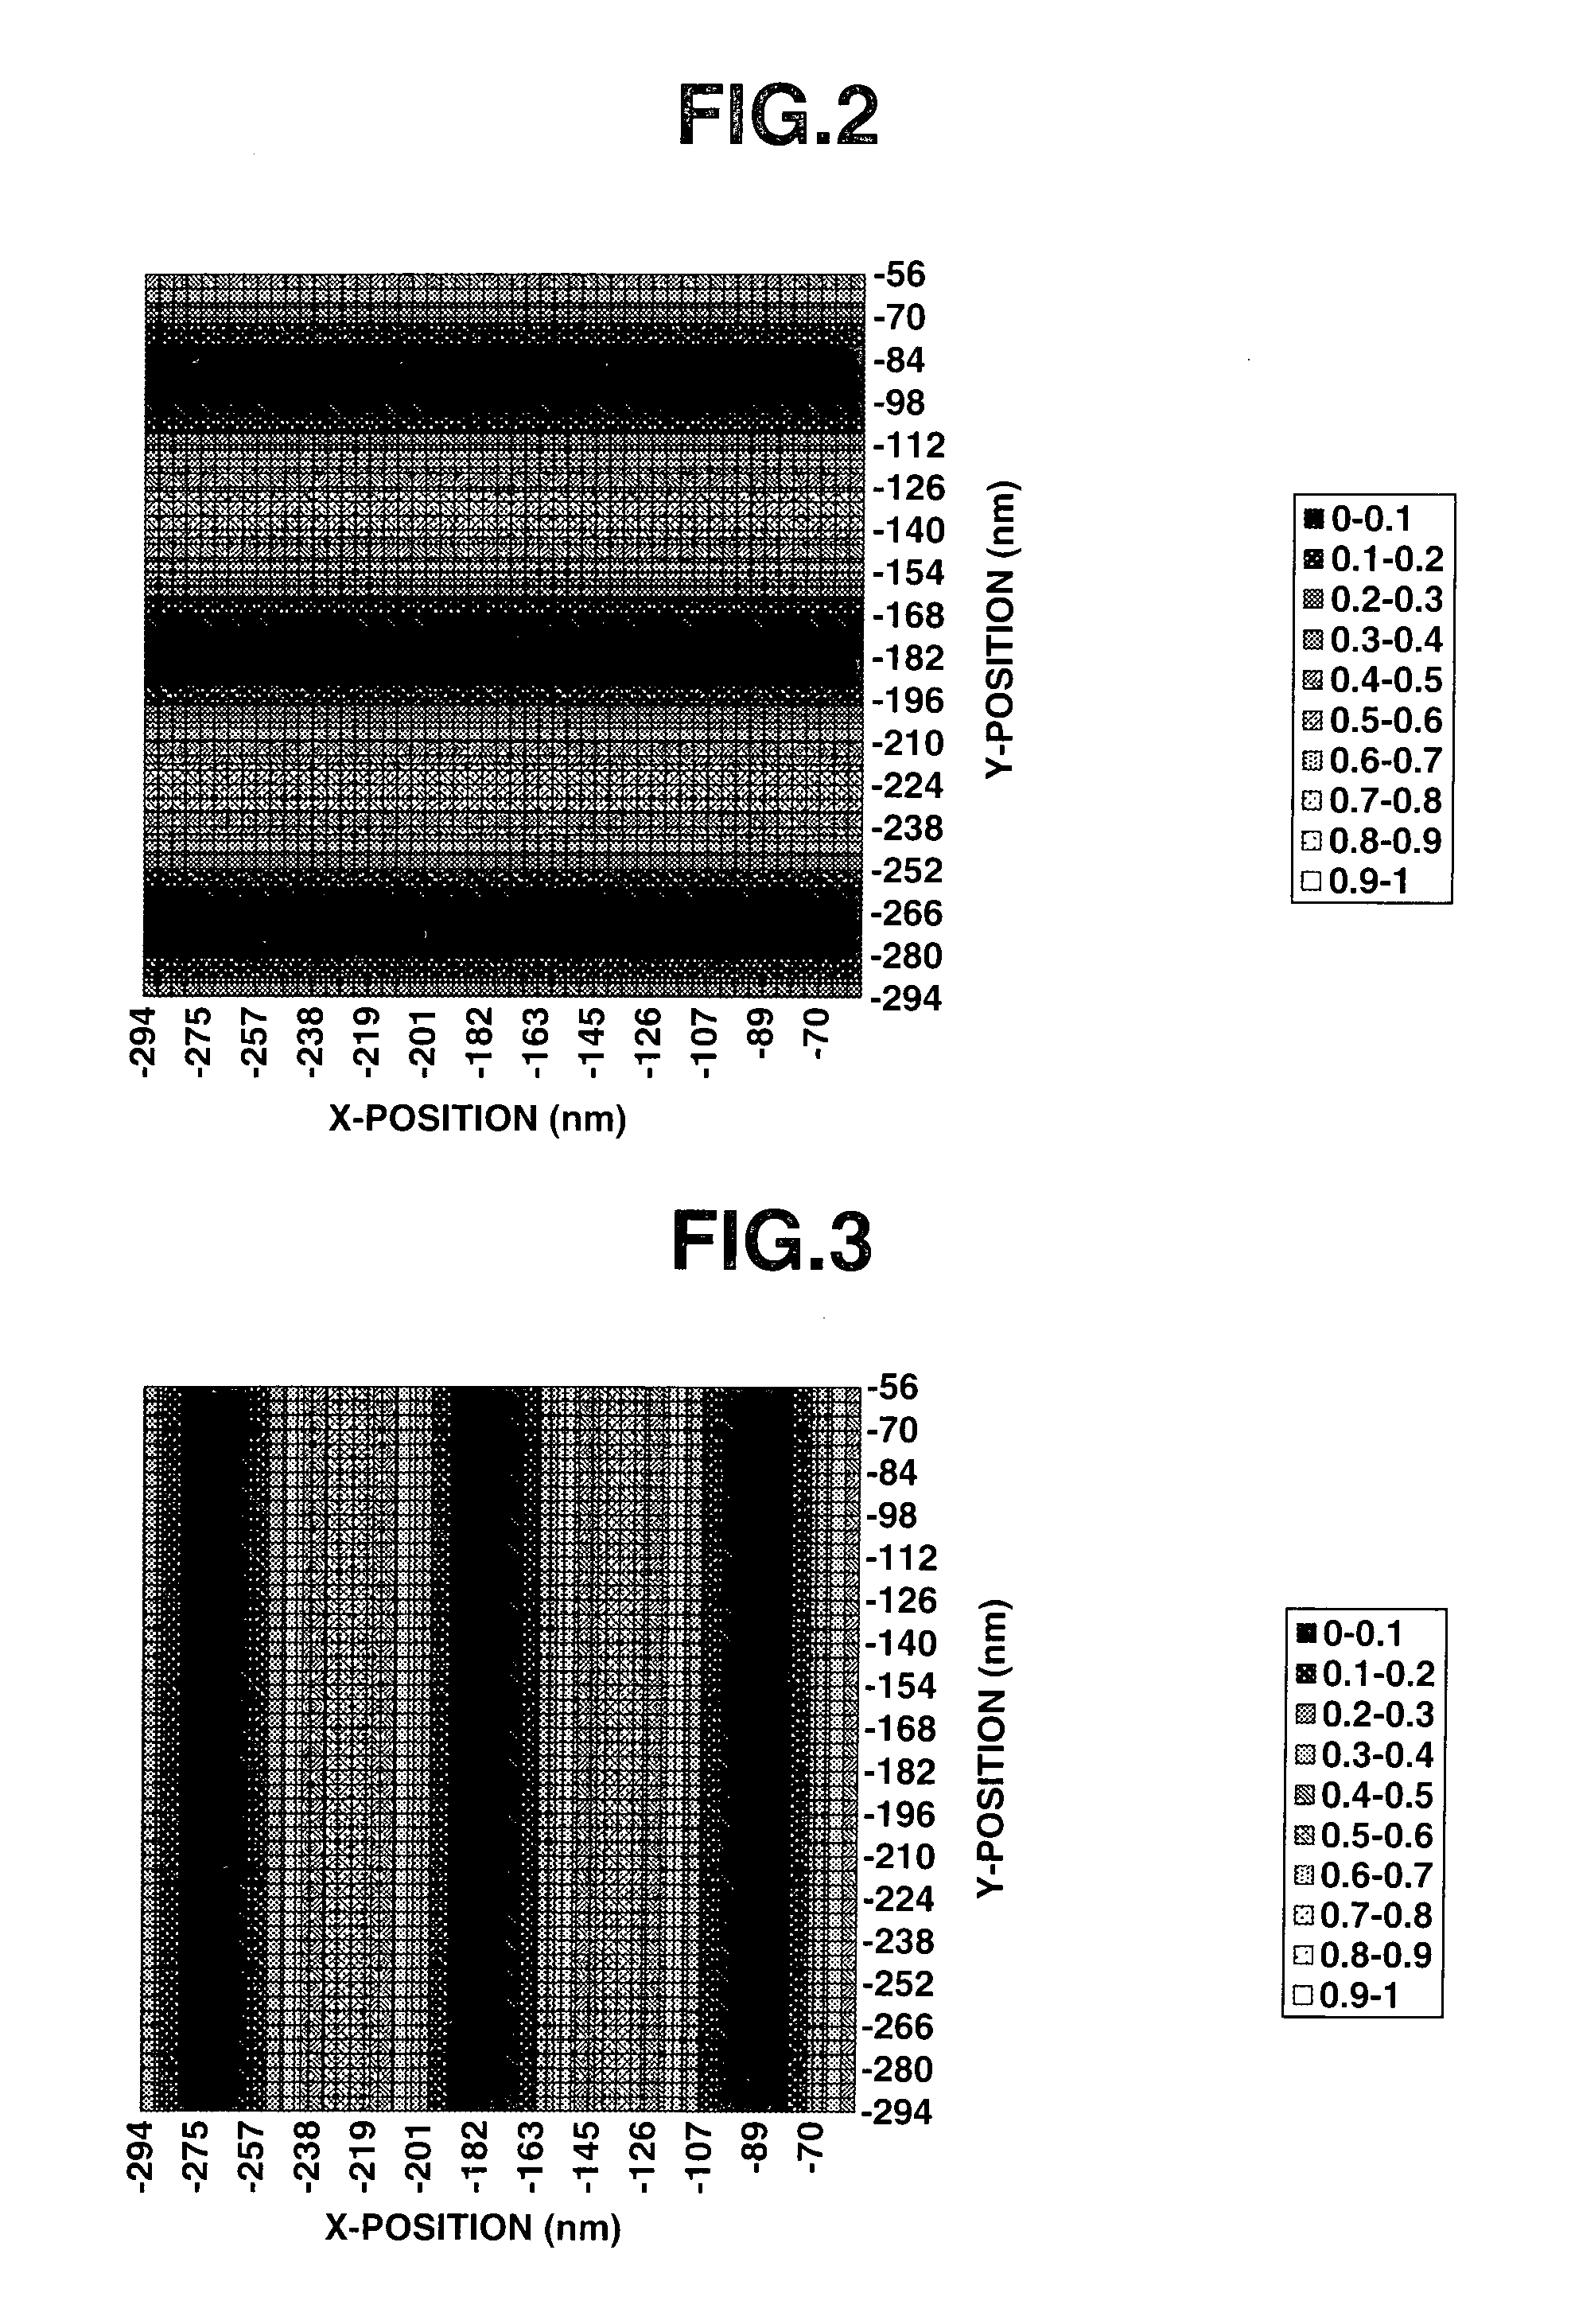 Acetal compound, polymer, resist composition, and patterning process